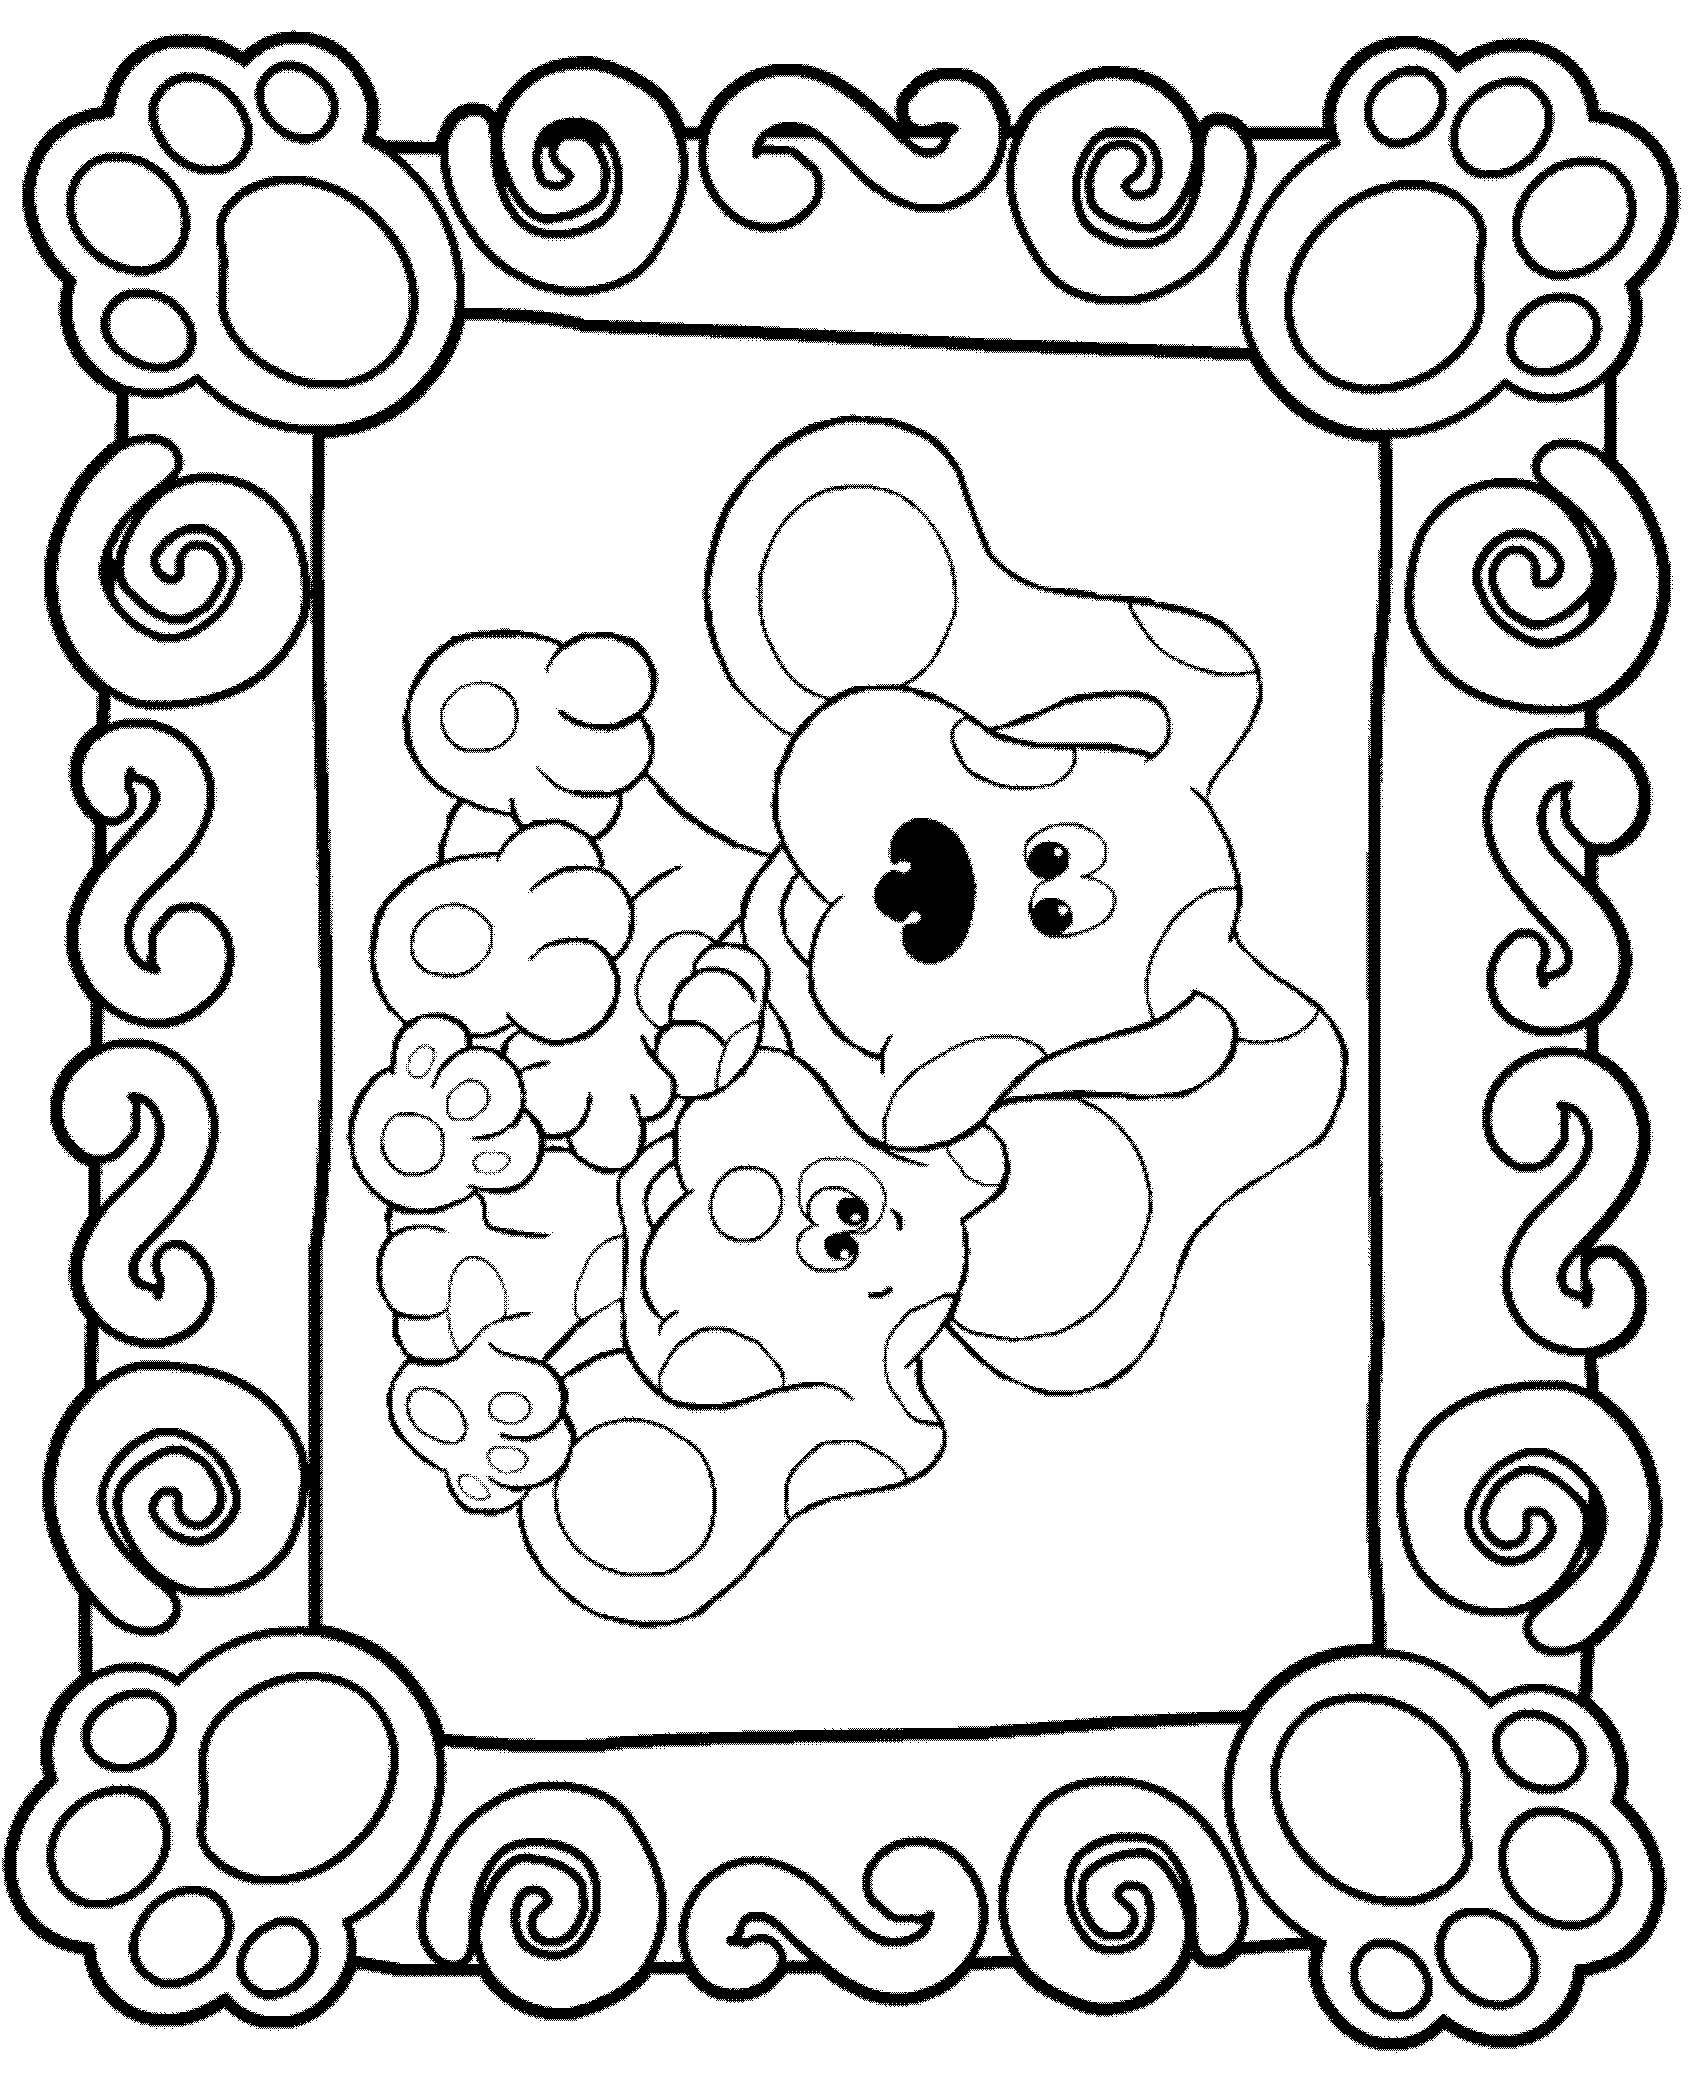 Blues Clues 15 coloring pages